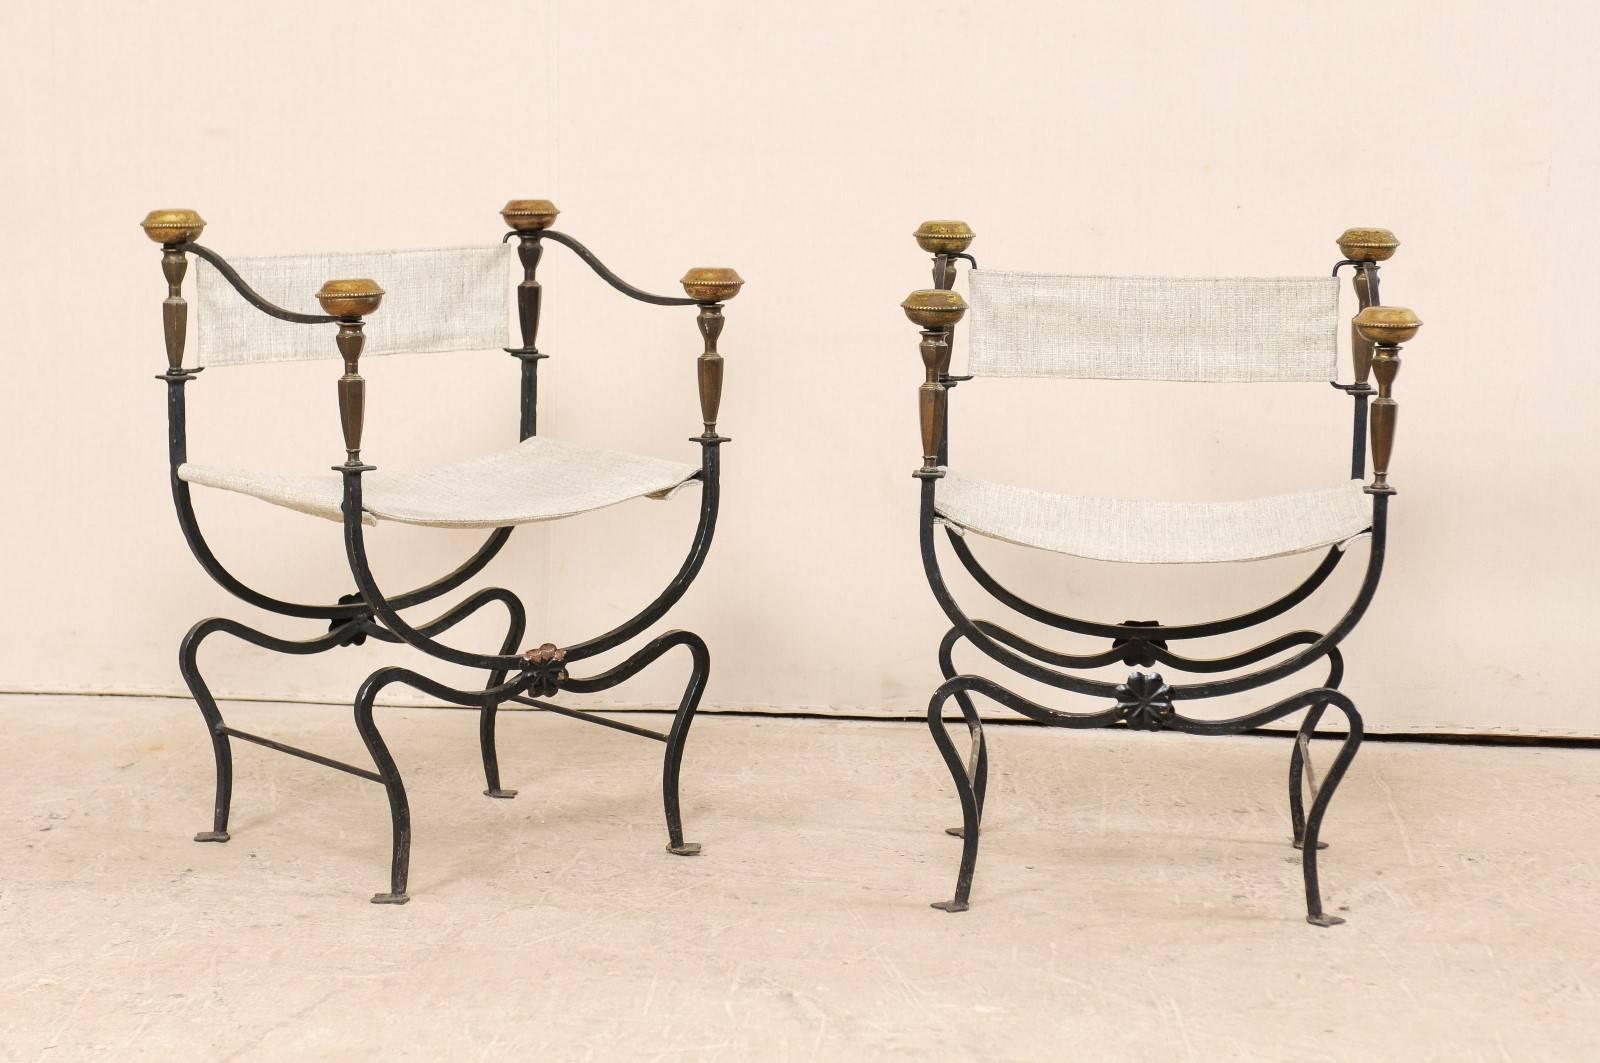 A pair of Italian curule savonarola chairs from the early 20th century. This pair of antique Italian curule chairs, also commonly called savonarola, are defined by their signature frames which connect where the upper frame meets the lower. There are